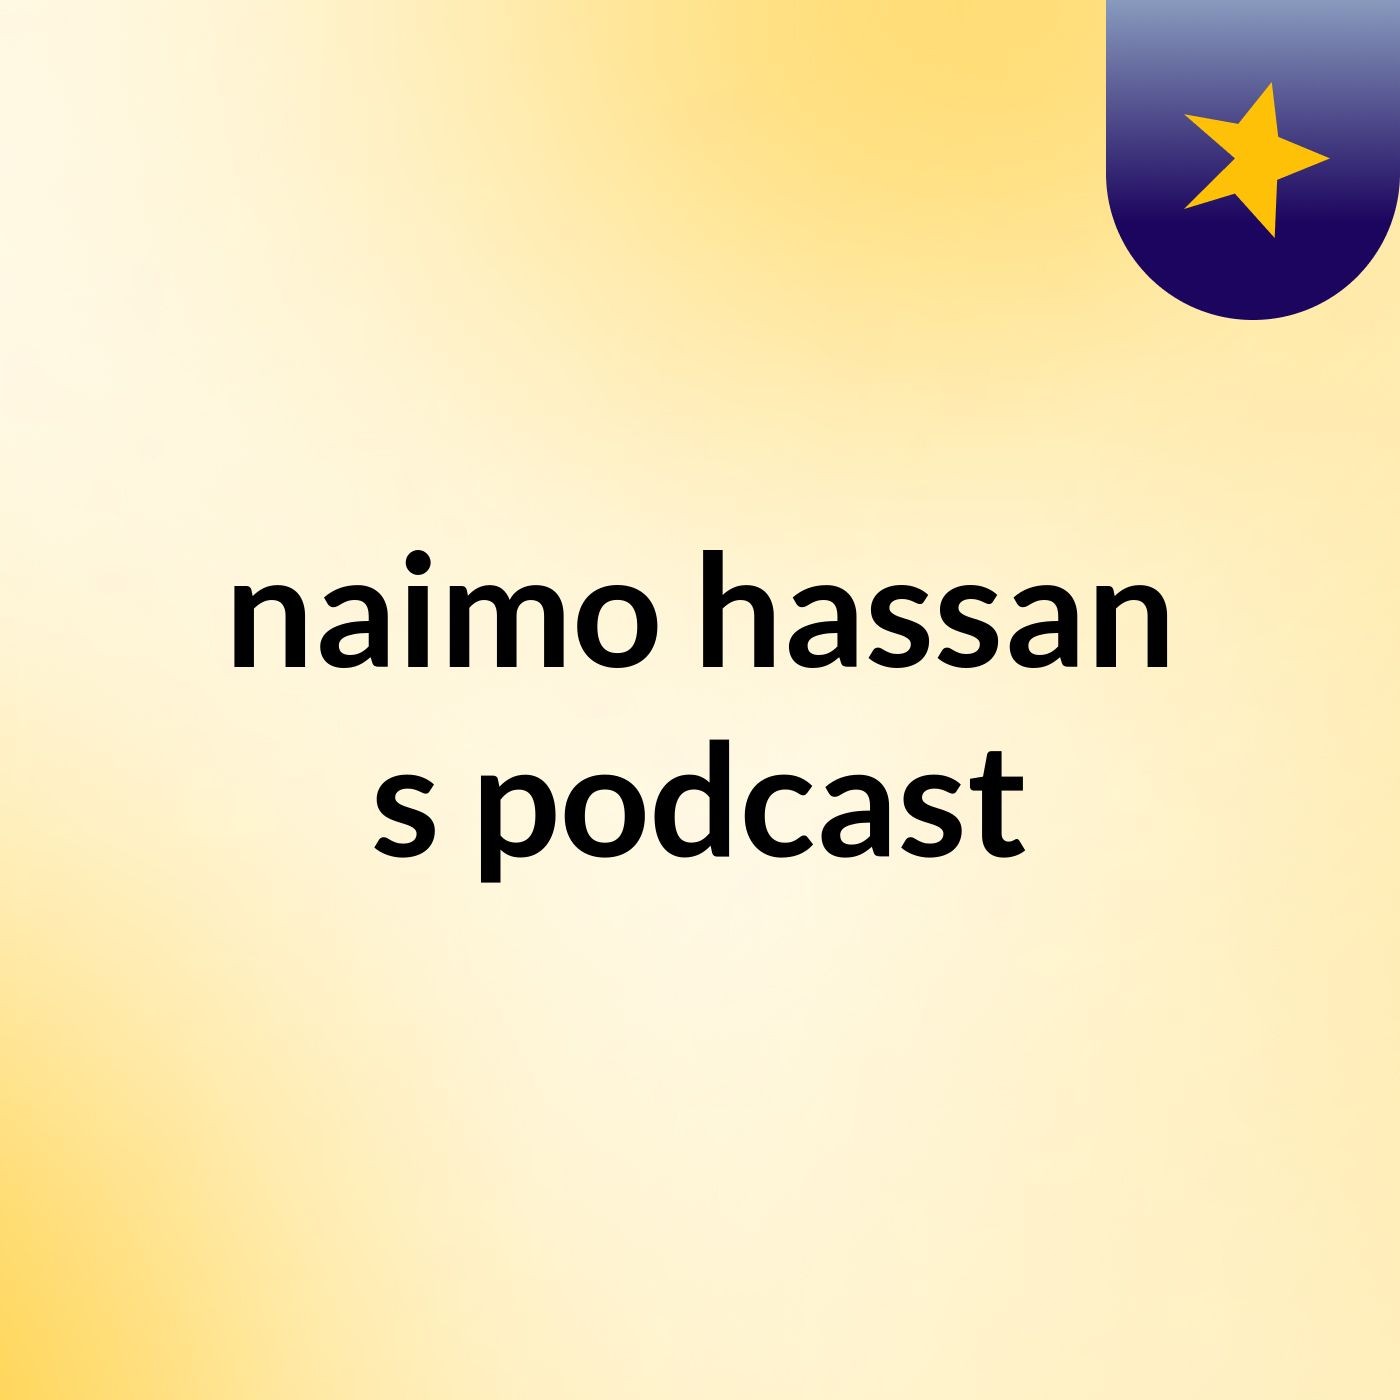 naimo hassan's podcast